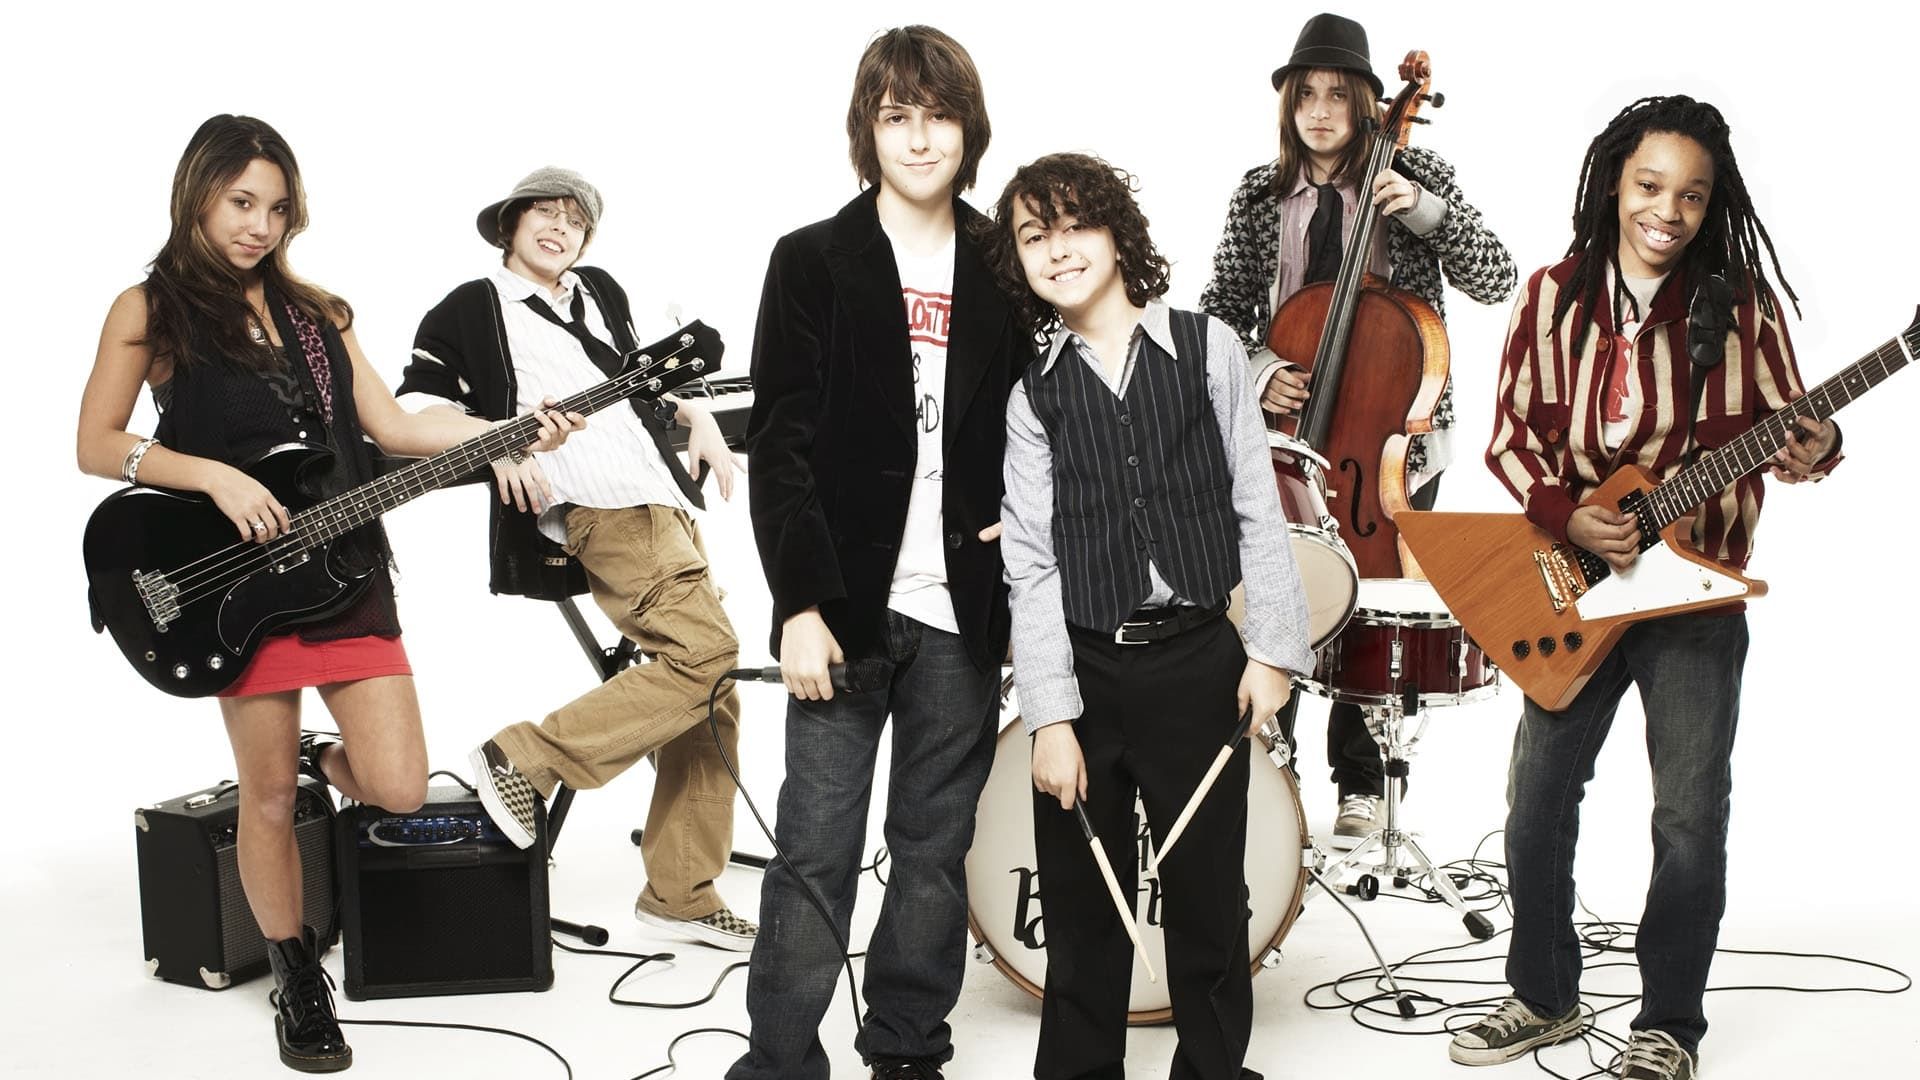 The Naked Brothers Band background